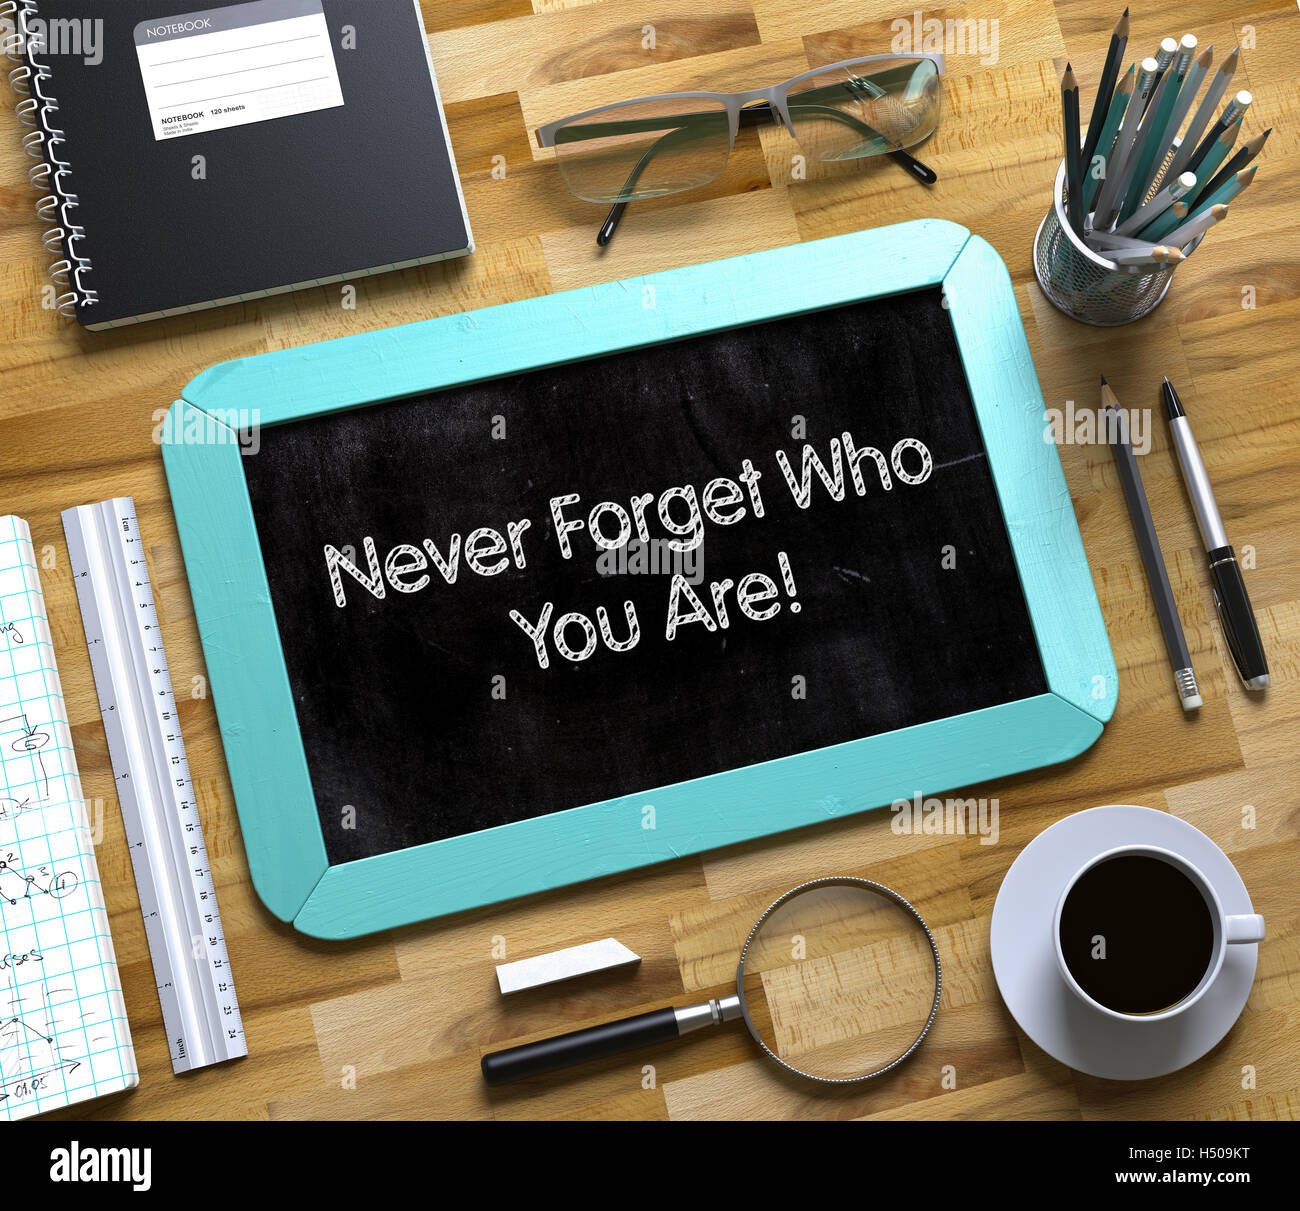 Never Forget Who You Are Concept on Small Chalkboard. 3D. Stock Photo